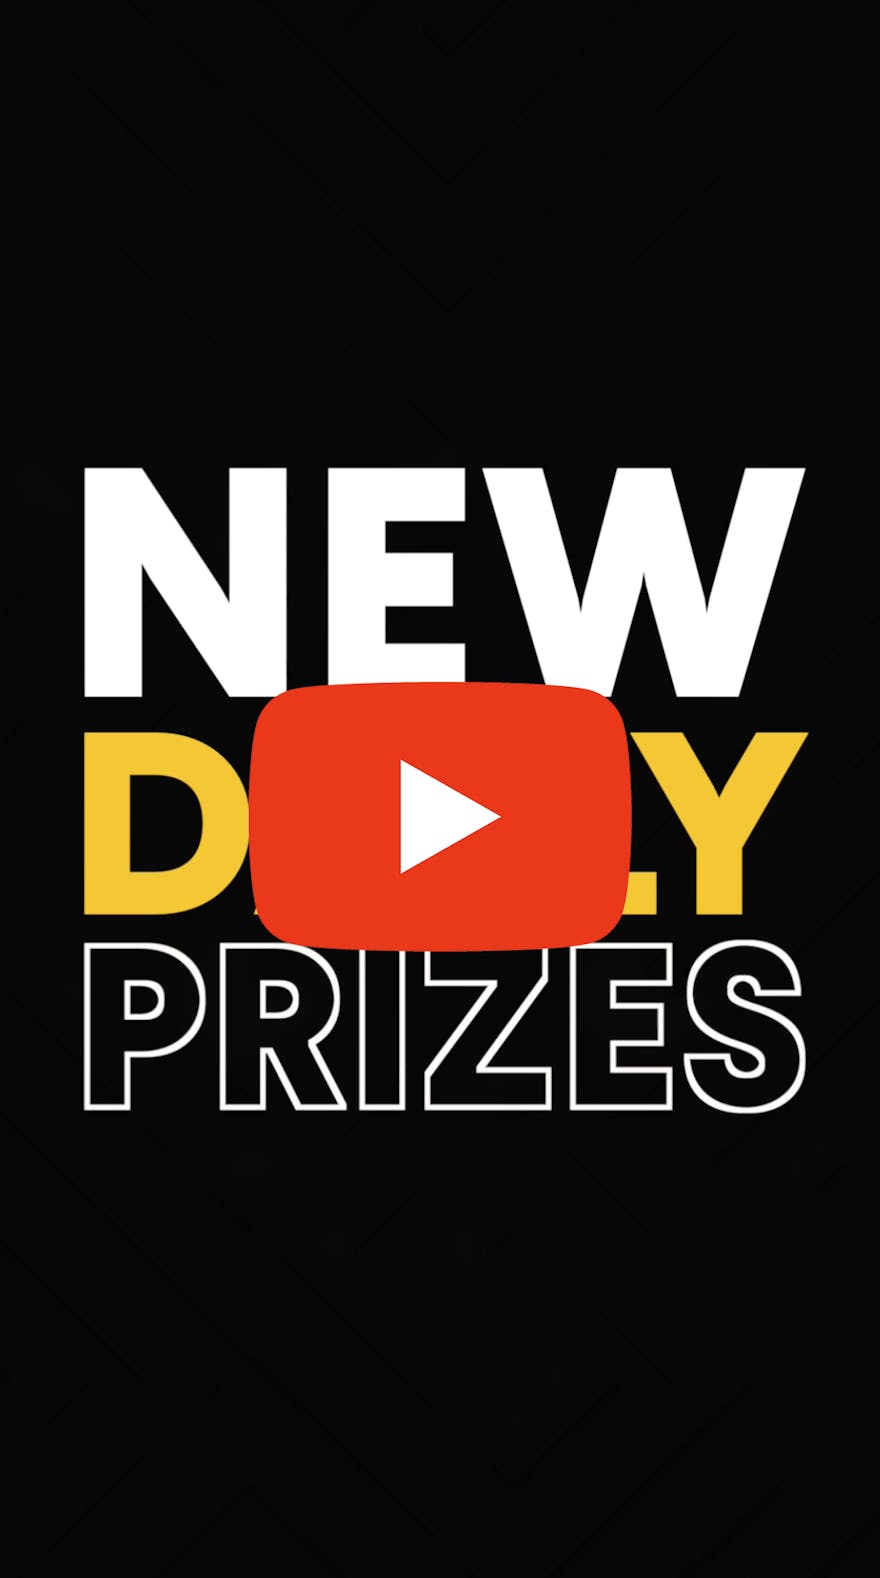 Prize Marketplace launch video